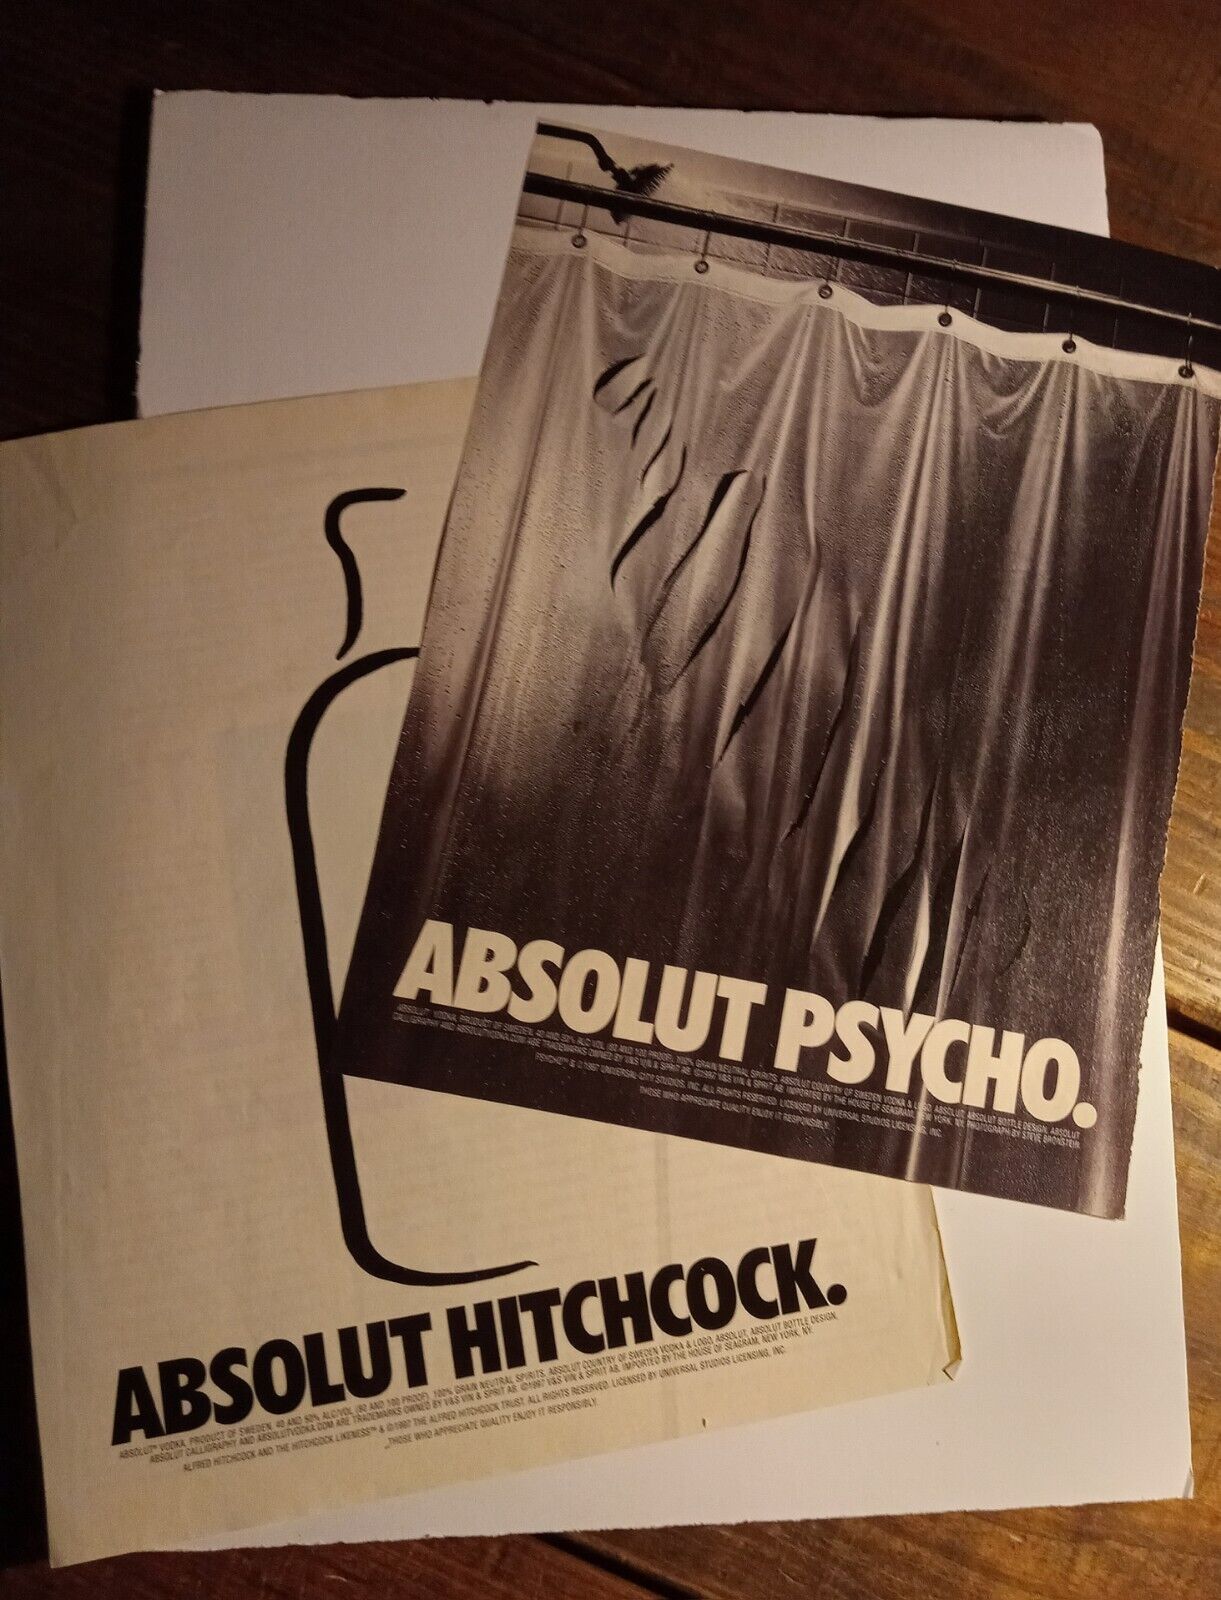 ABSOLUT VODKA ADS -- Absolut Psycho, Absolut Hitchcock, We all go a little mad.